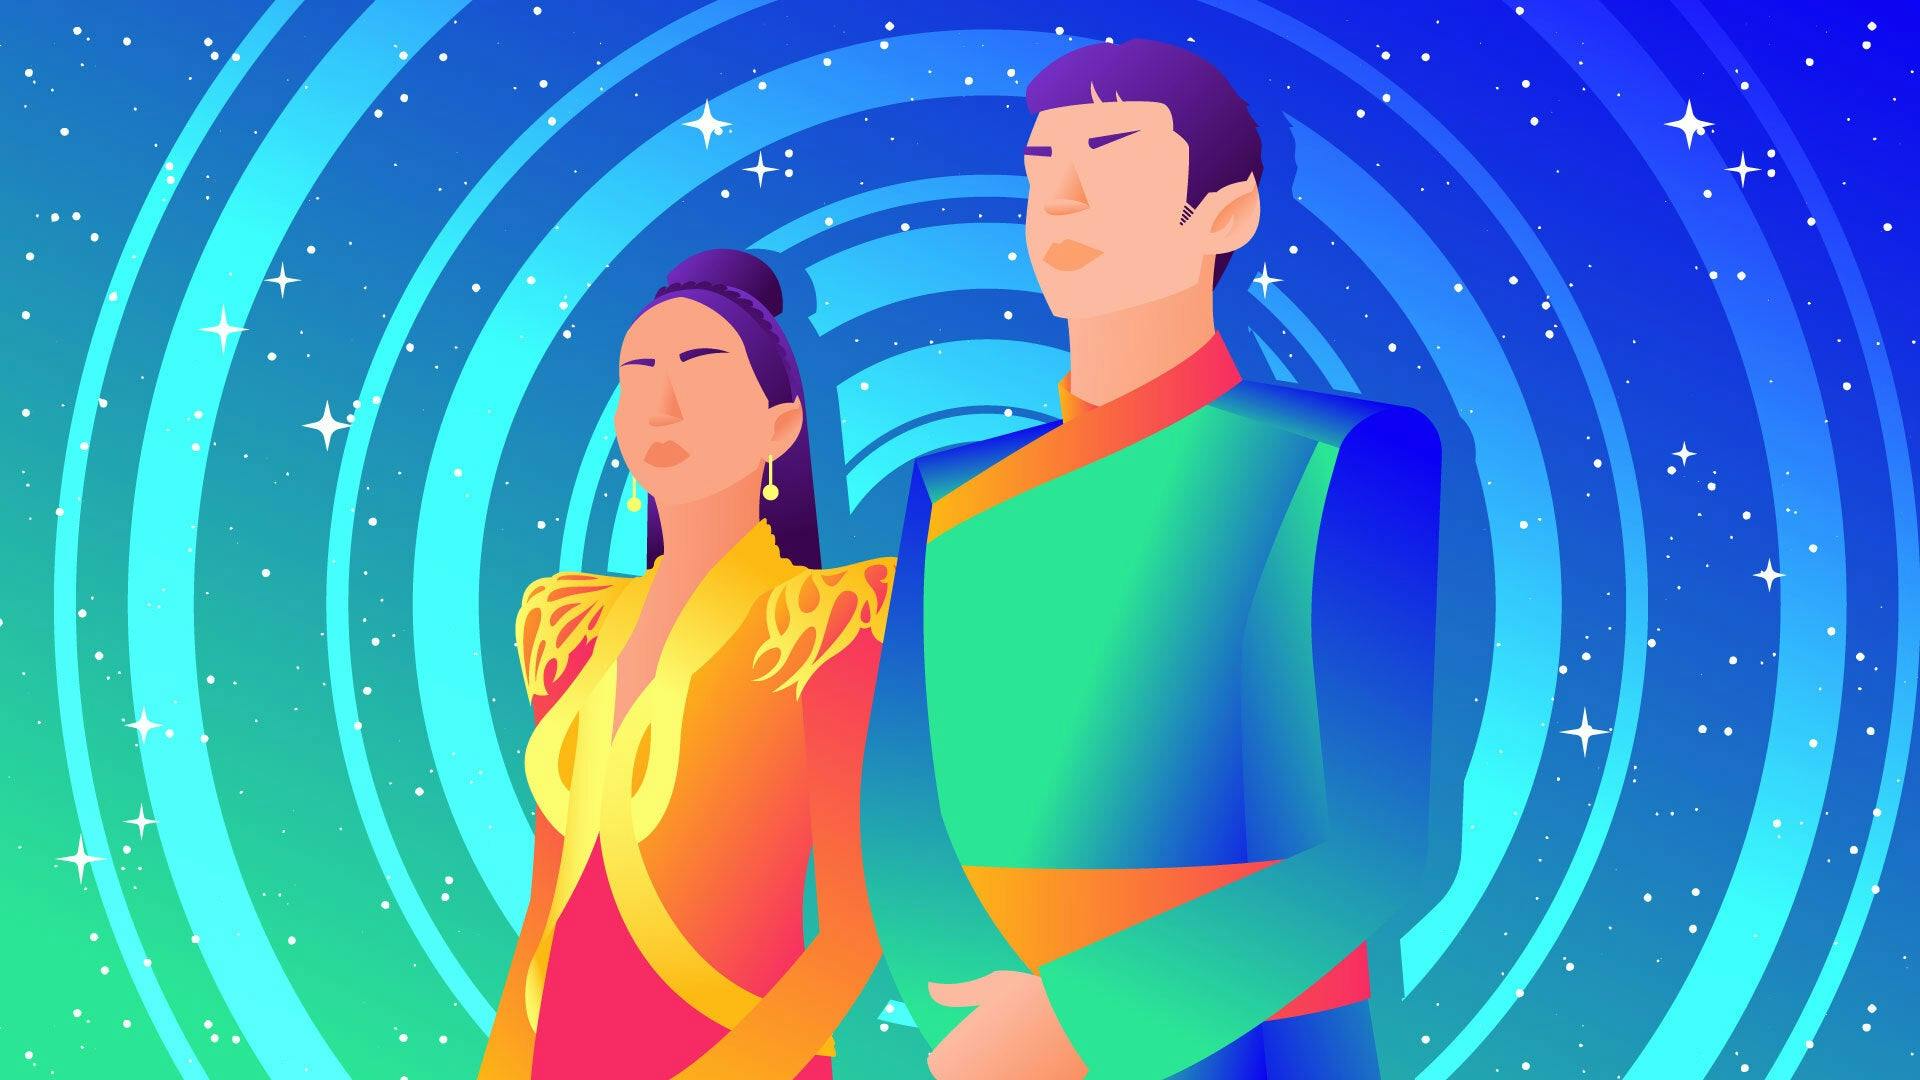 Illustrated banner of T'Pring and Spock standing side-by-side ahead of their Vulcan wedding ritual